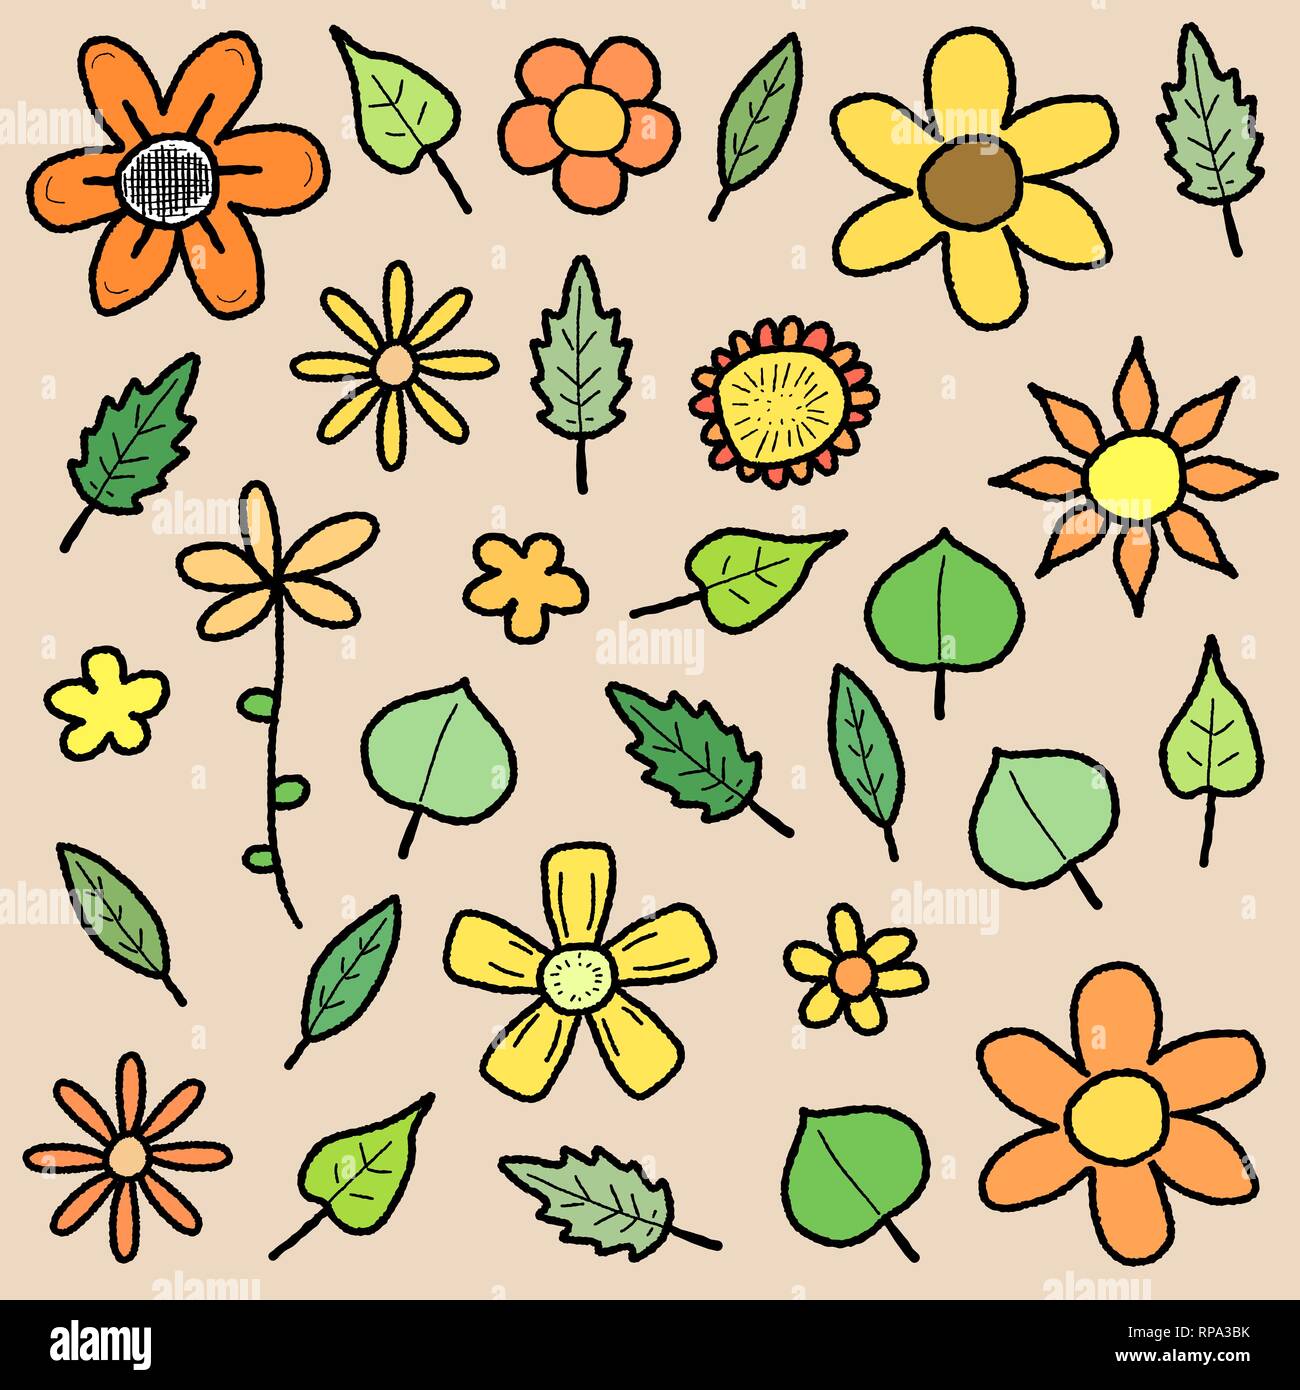 Doodle illustration collection with various flowers and leaves. Floral scribble set. Stock Vector